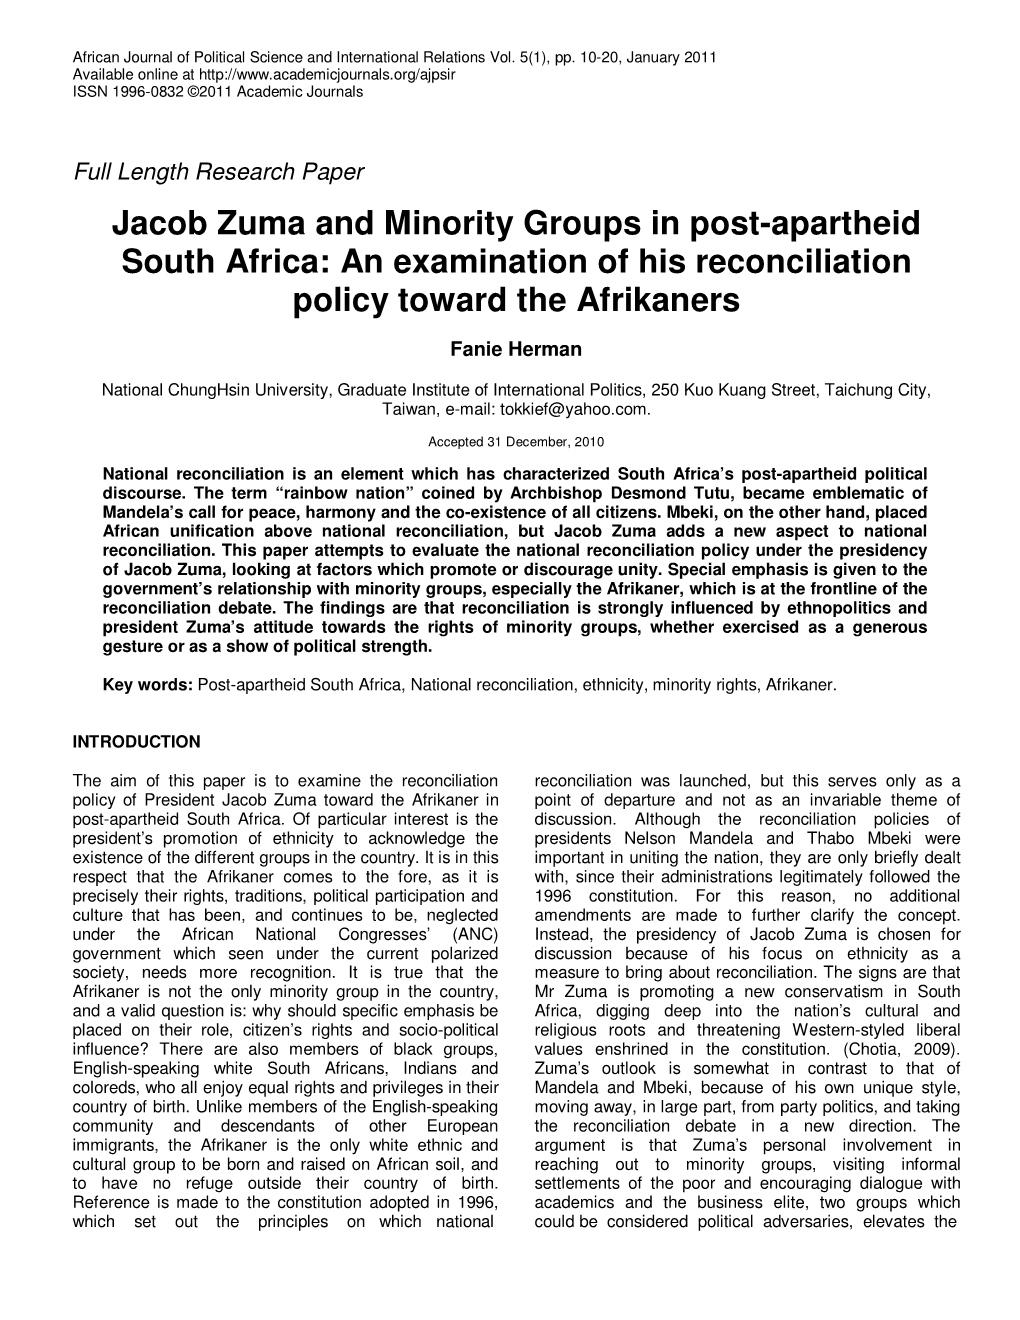 Jacob Zuma and Minority Groups in Post-Apartheid South Africa: an Examination of His Reconciliation Policy Toward the Afrikaners